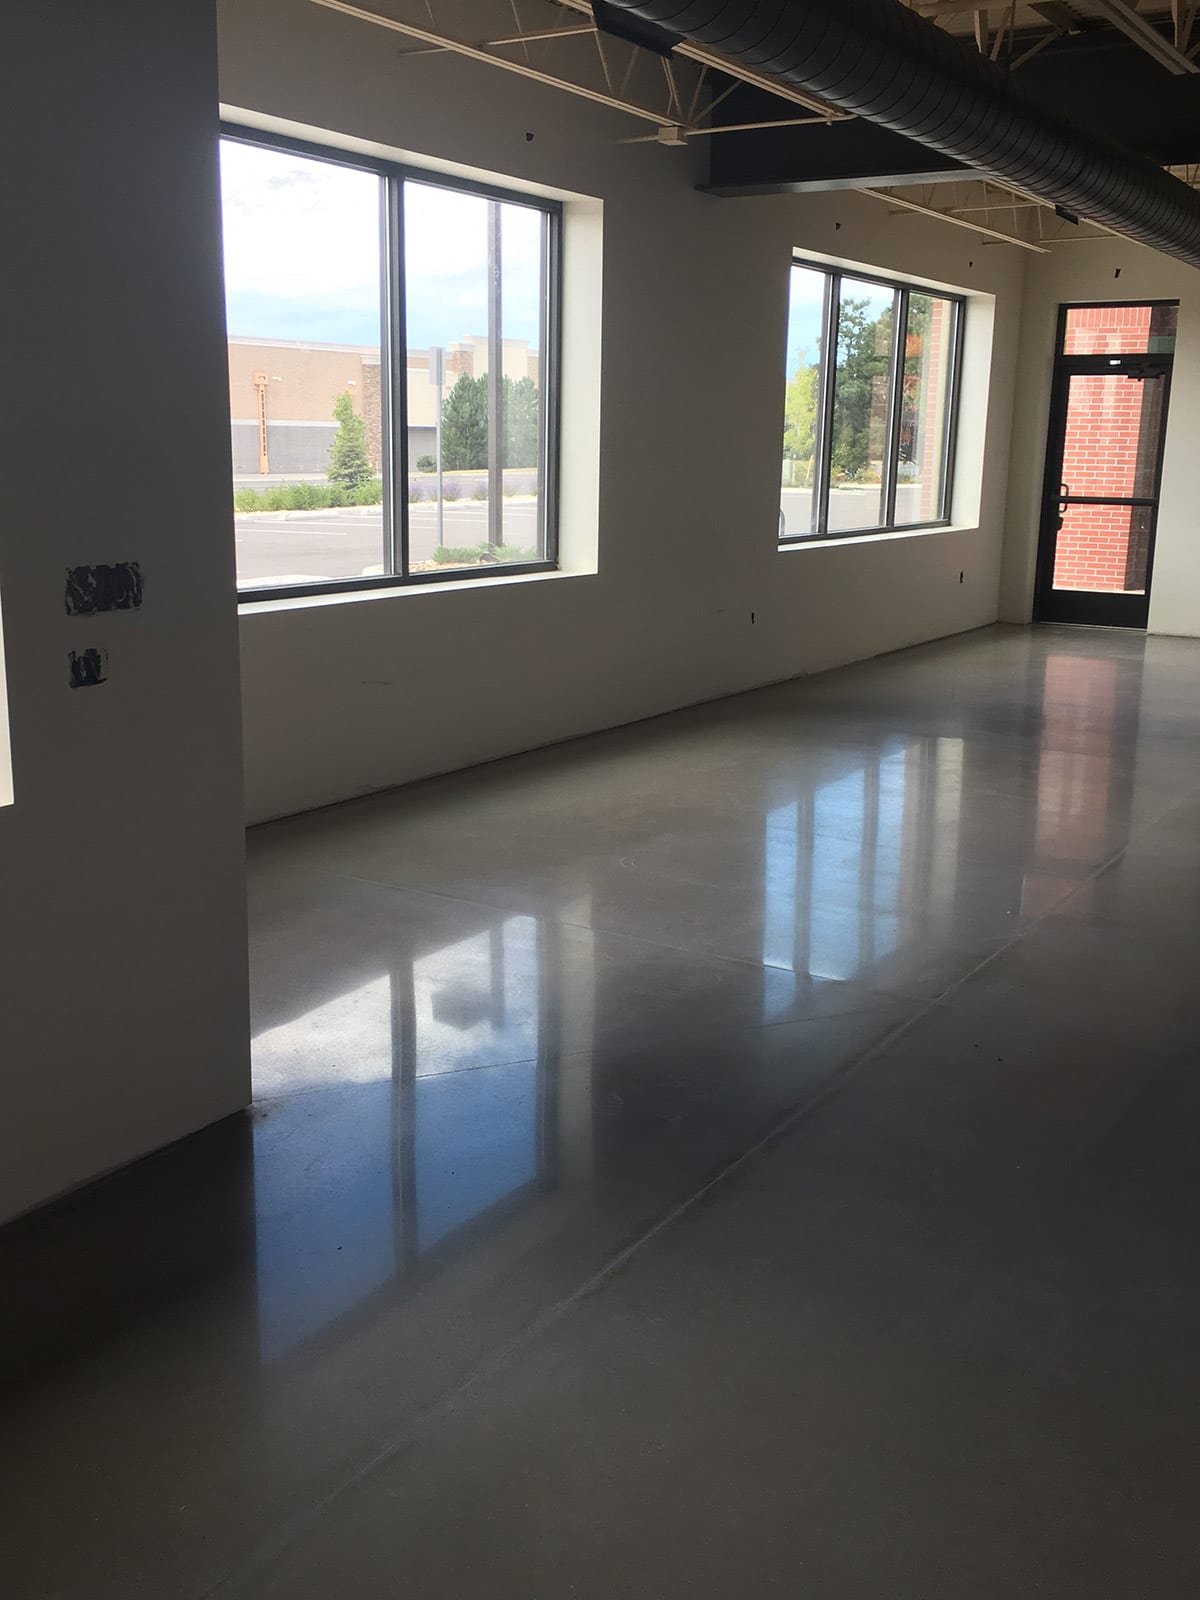 polished concrete floors company in Denver, CO